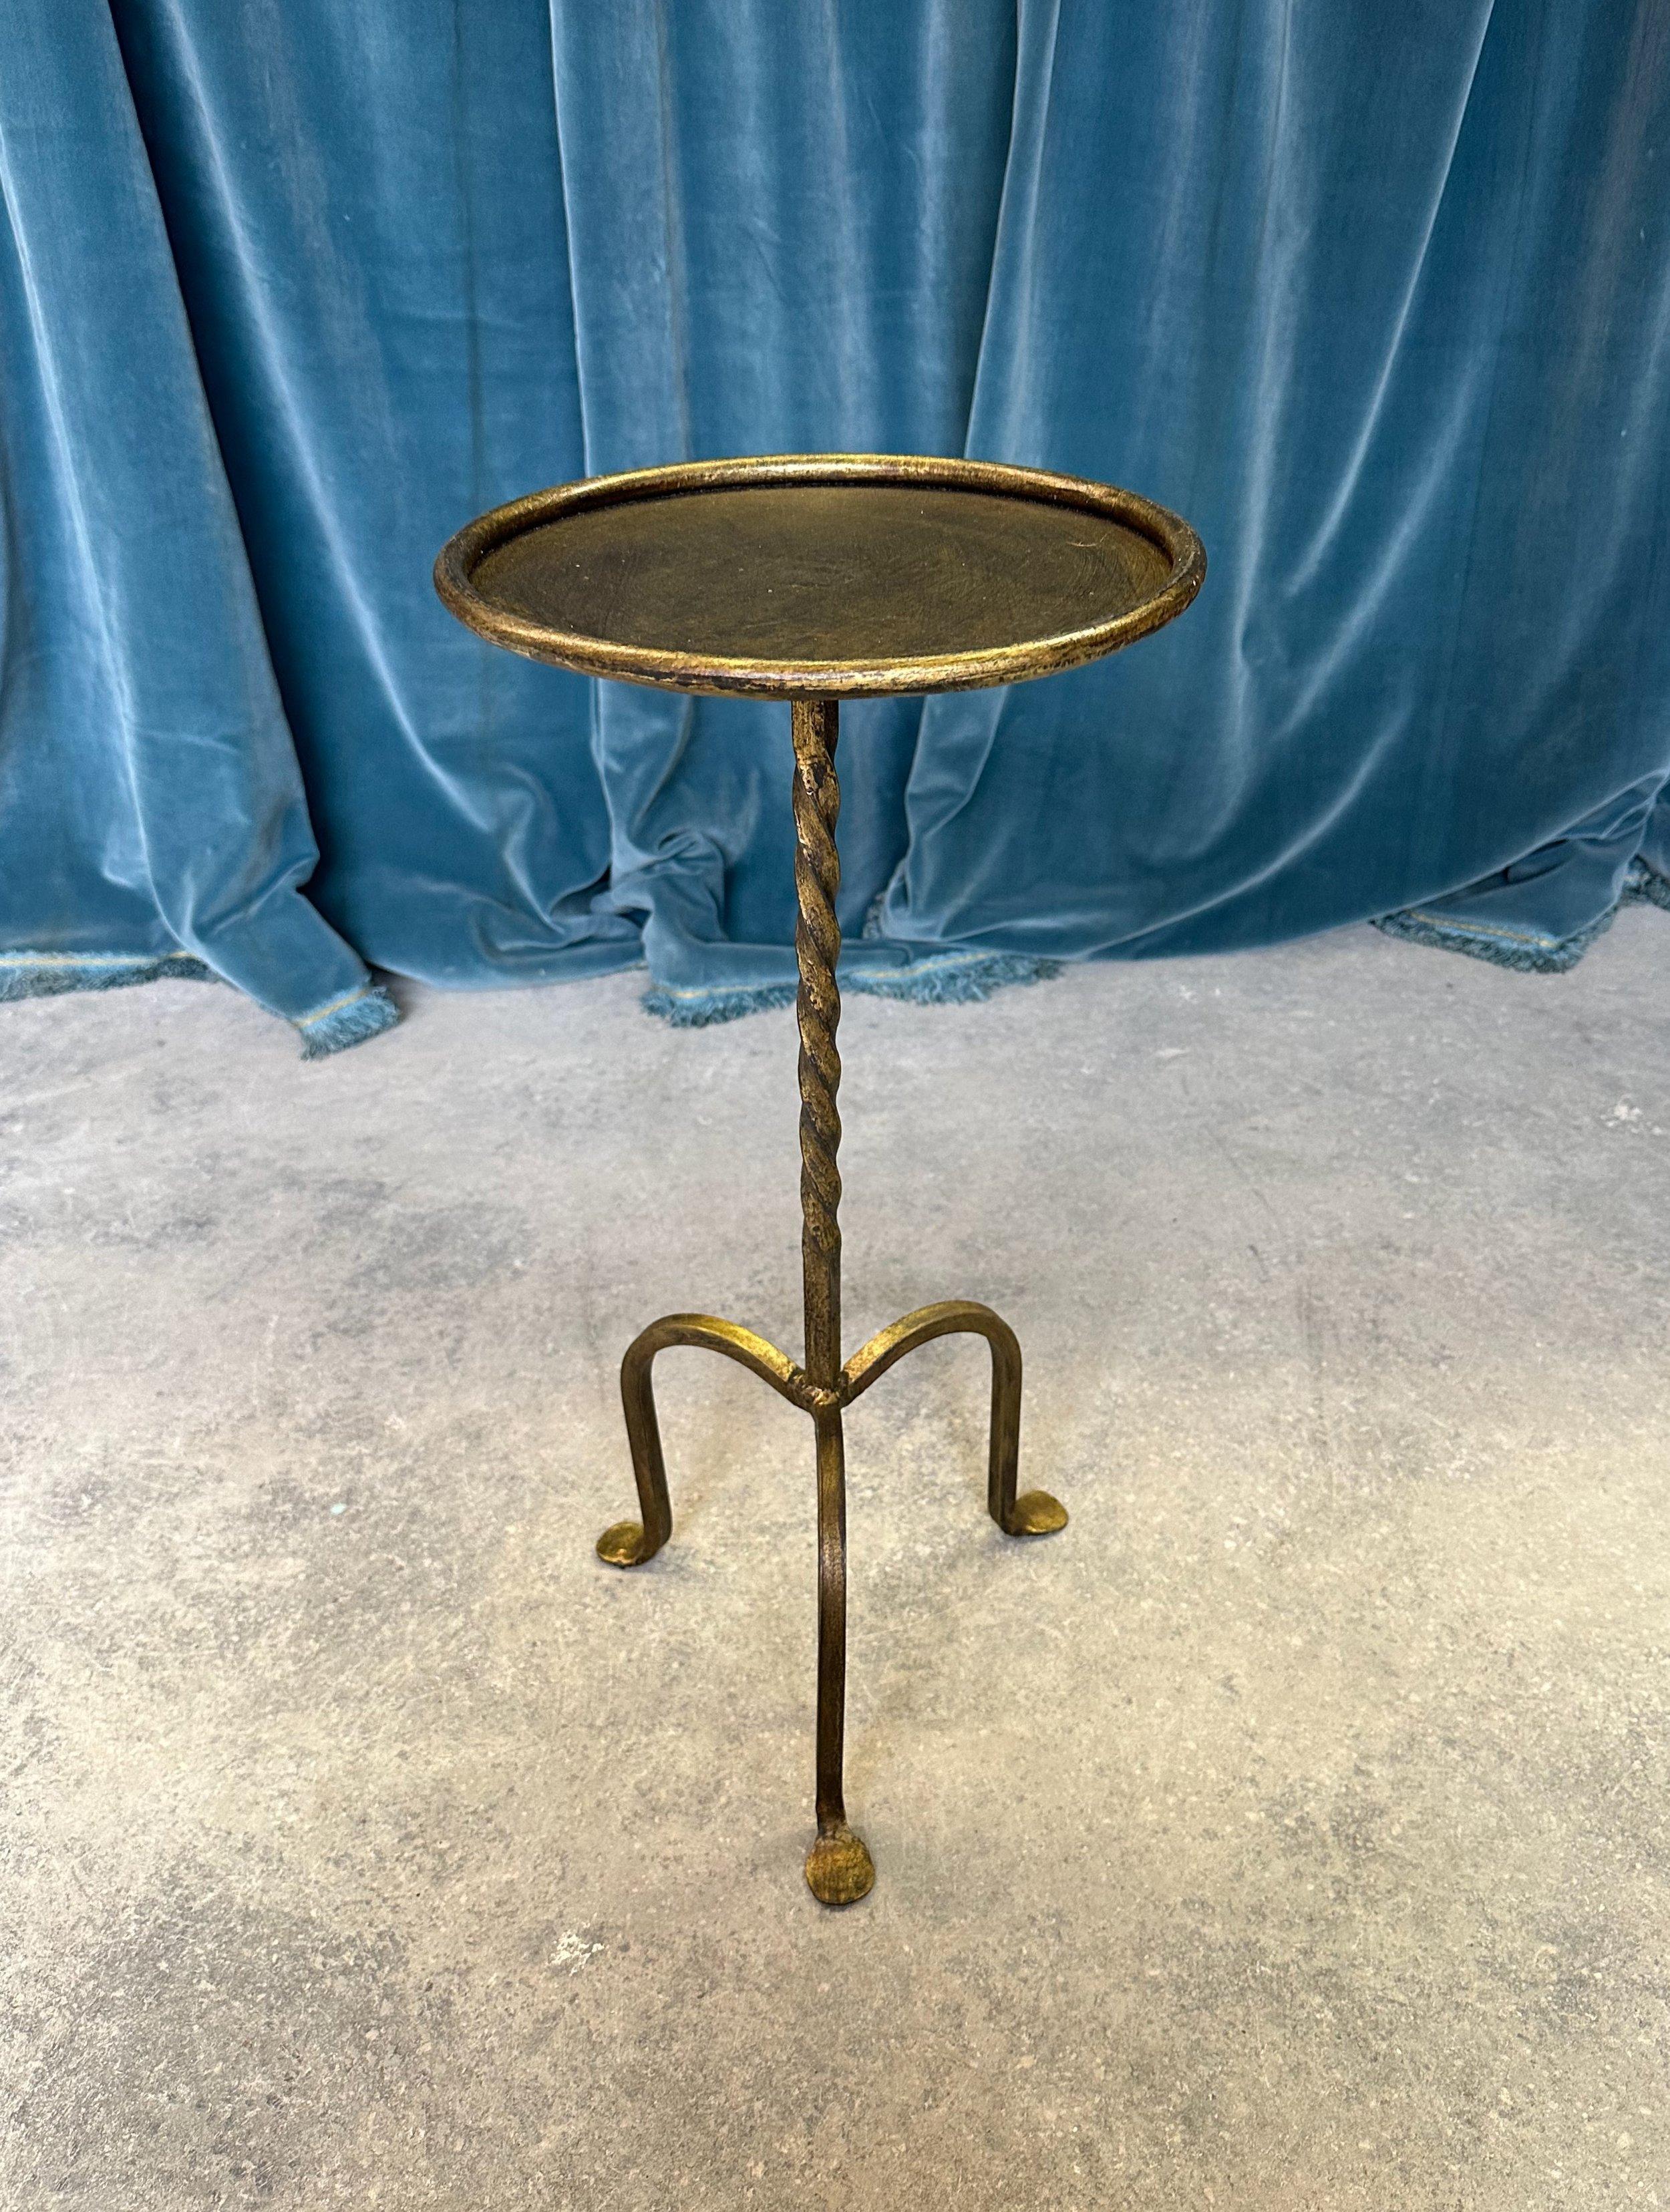 A handsome Spanish gilt iron drinks table, recently crafted to our design and specifications, is a unique and charming piece that will surely catch the eye. This small side table features a twisted stem design mounted on a sturdy tripod base,